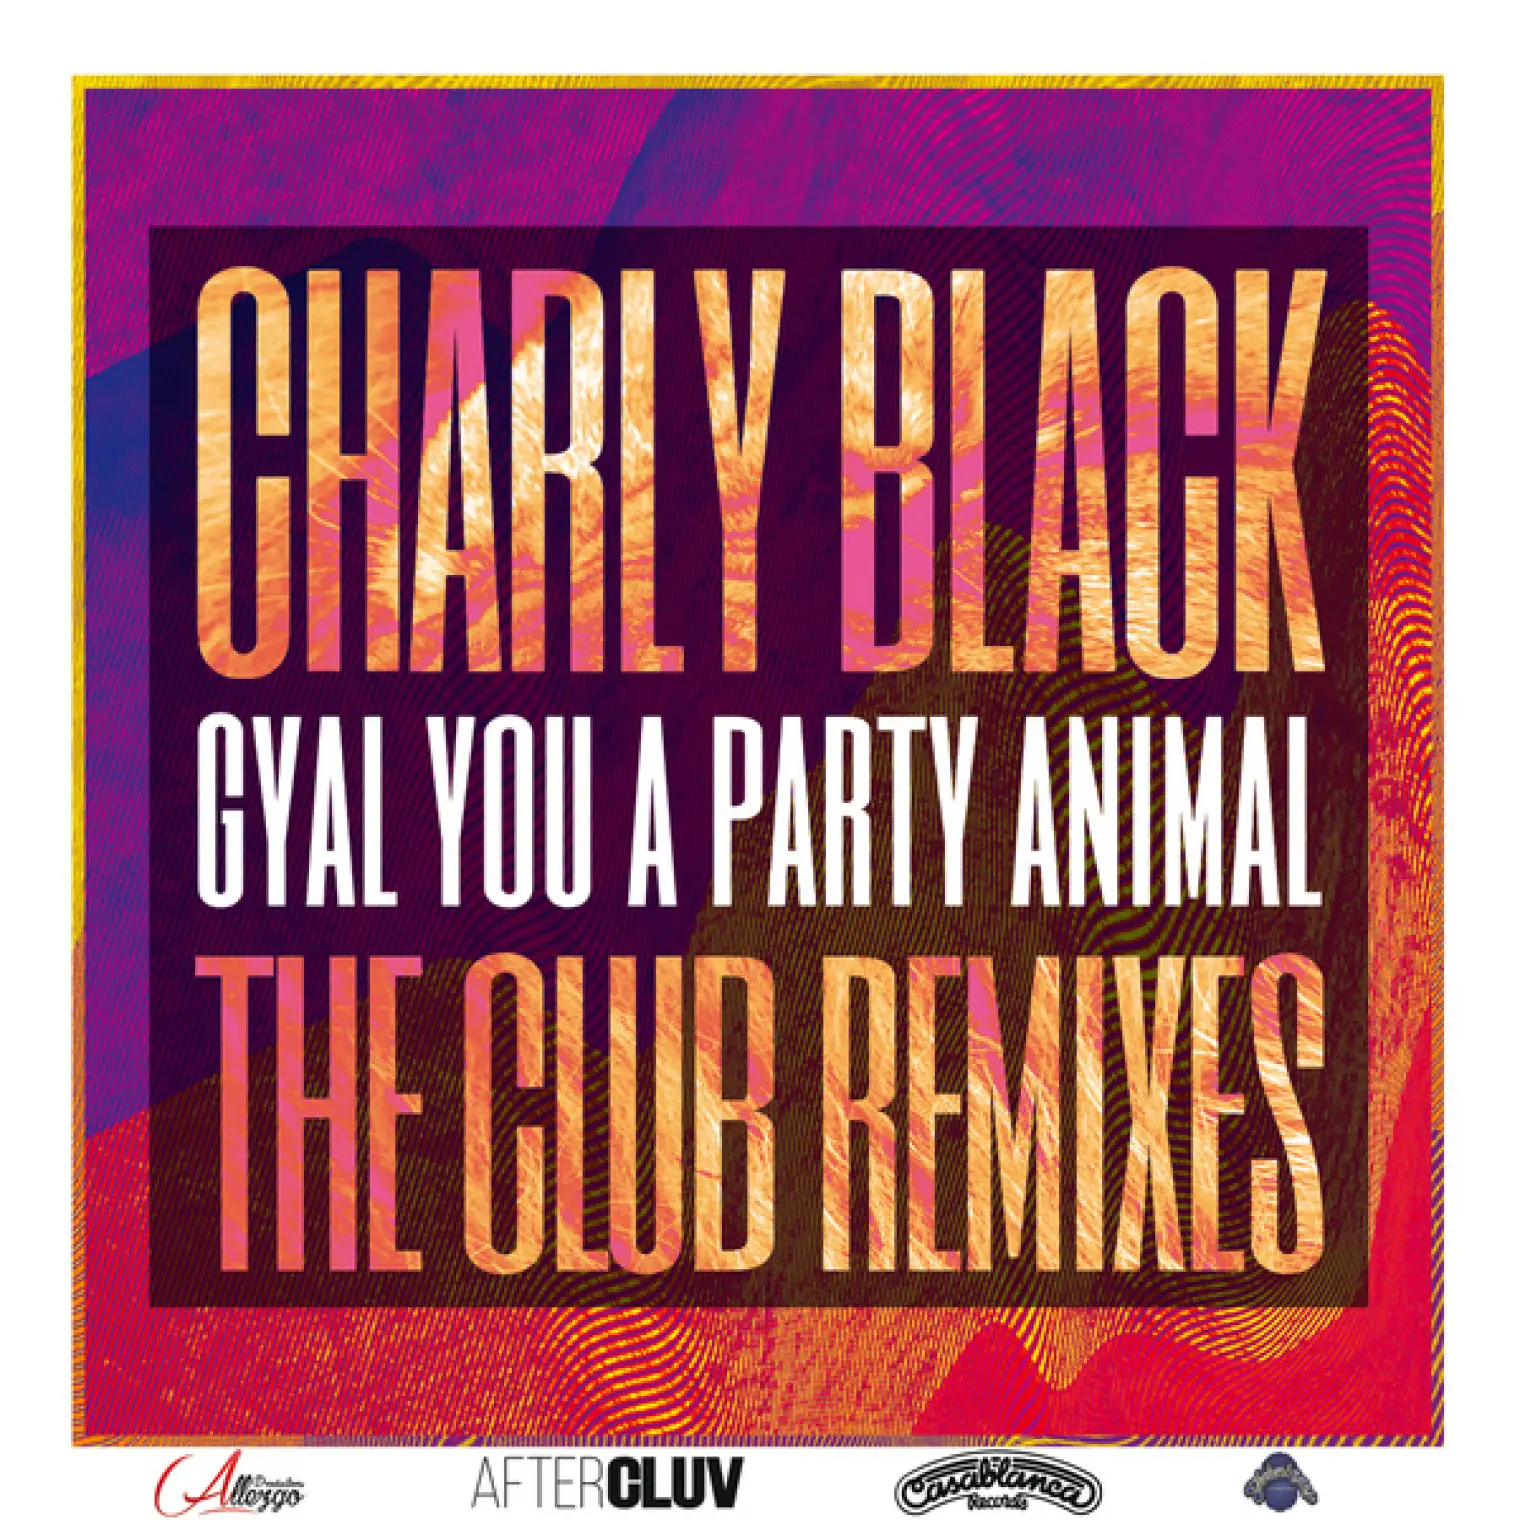 Gyal You A Party Animal -  Charly Black 